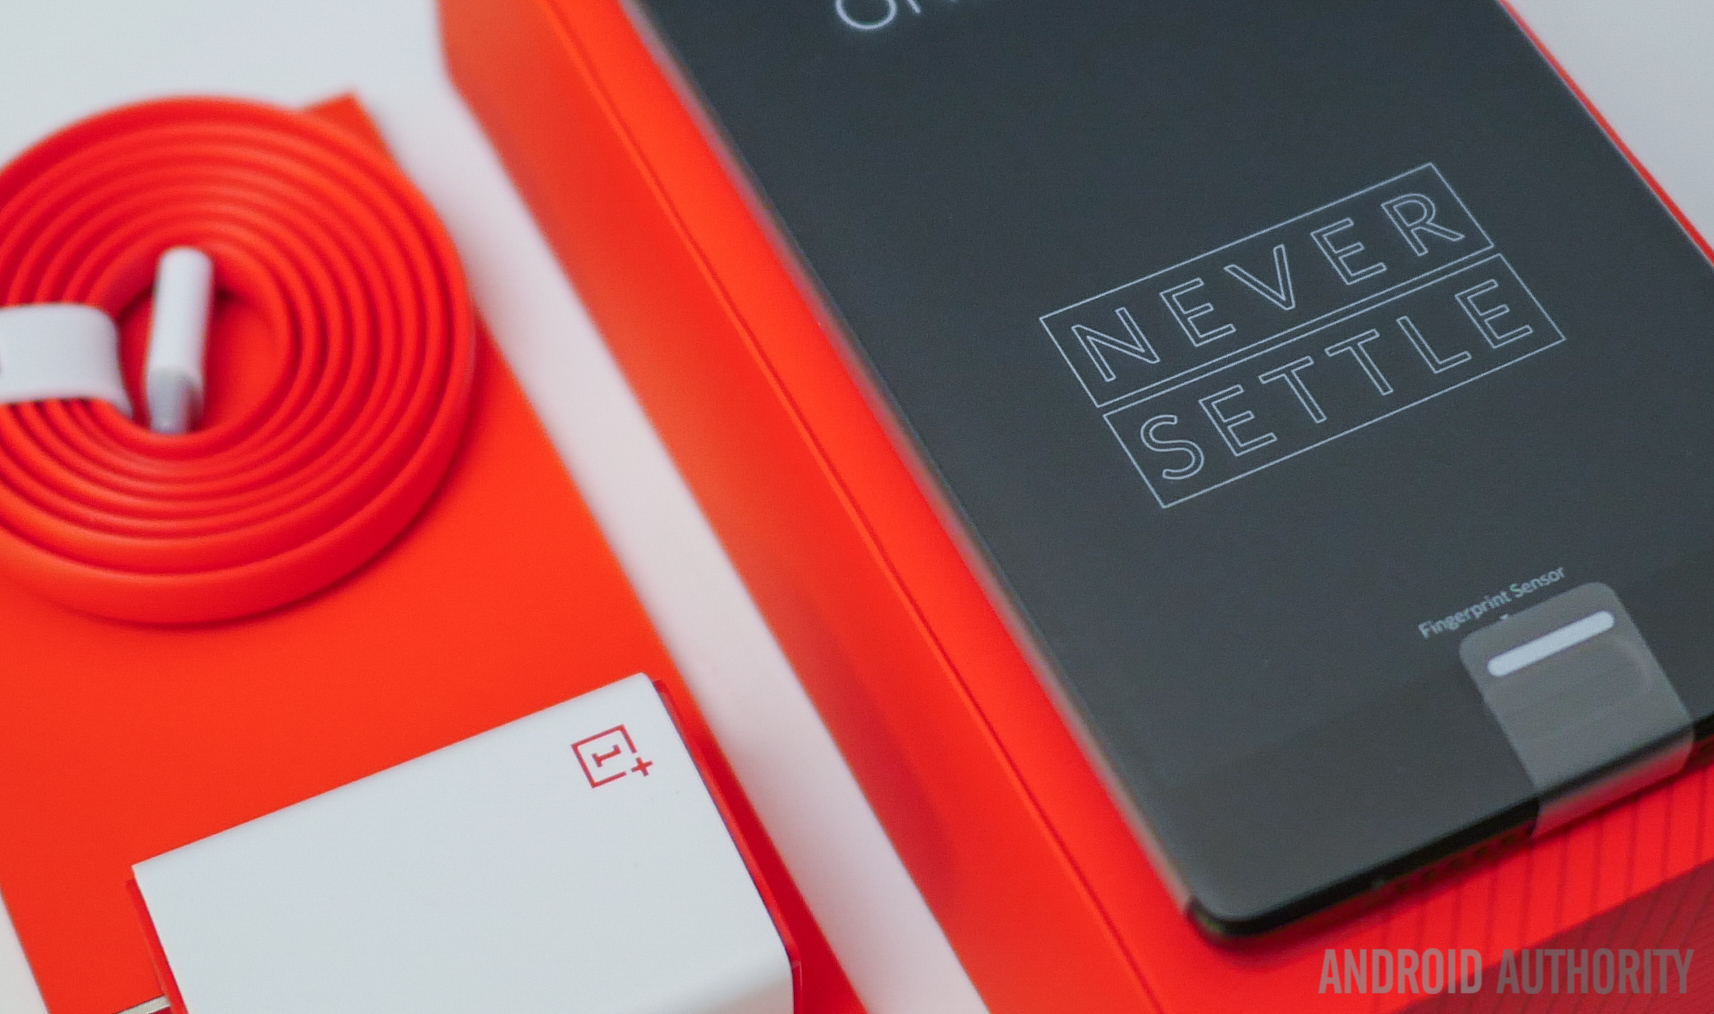 oneplus 2 unboxing initial setup aa (8 of 32)